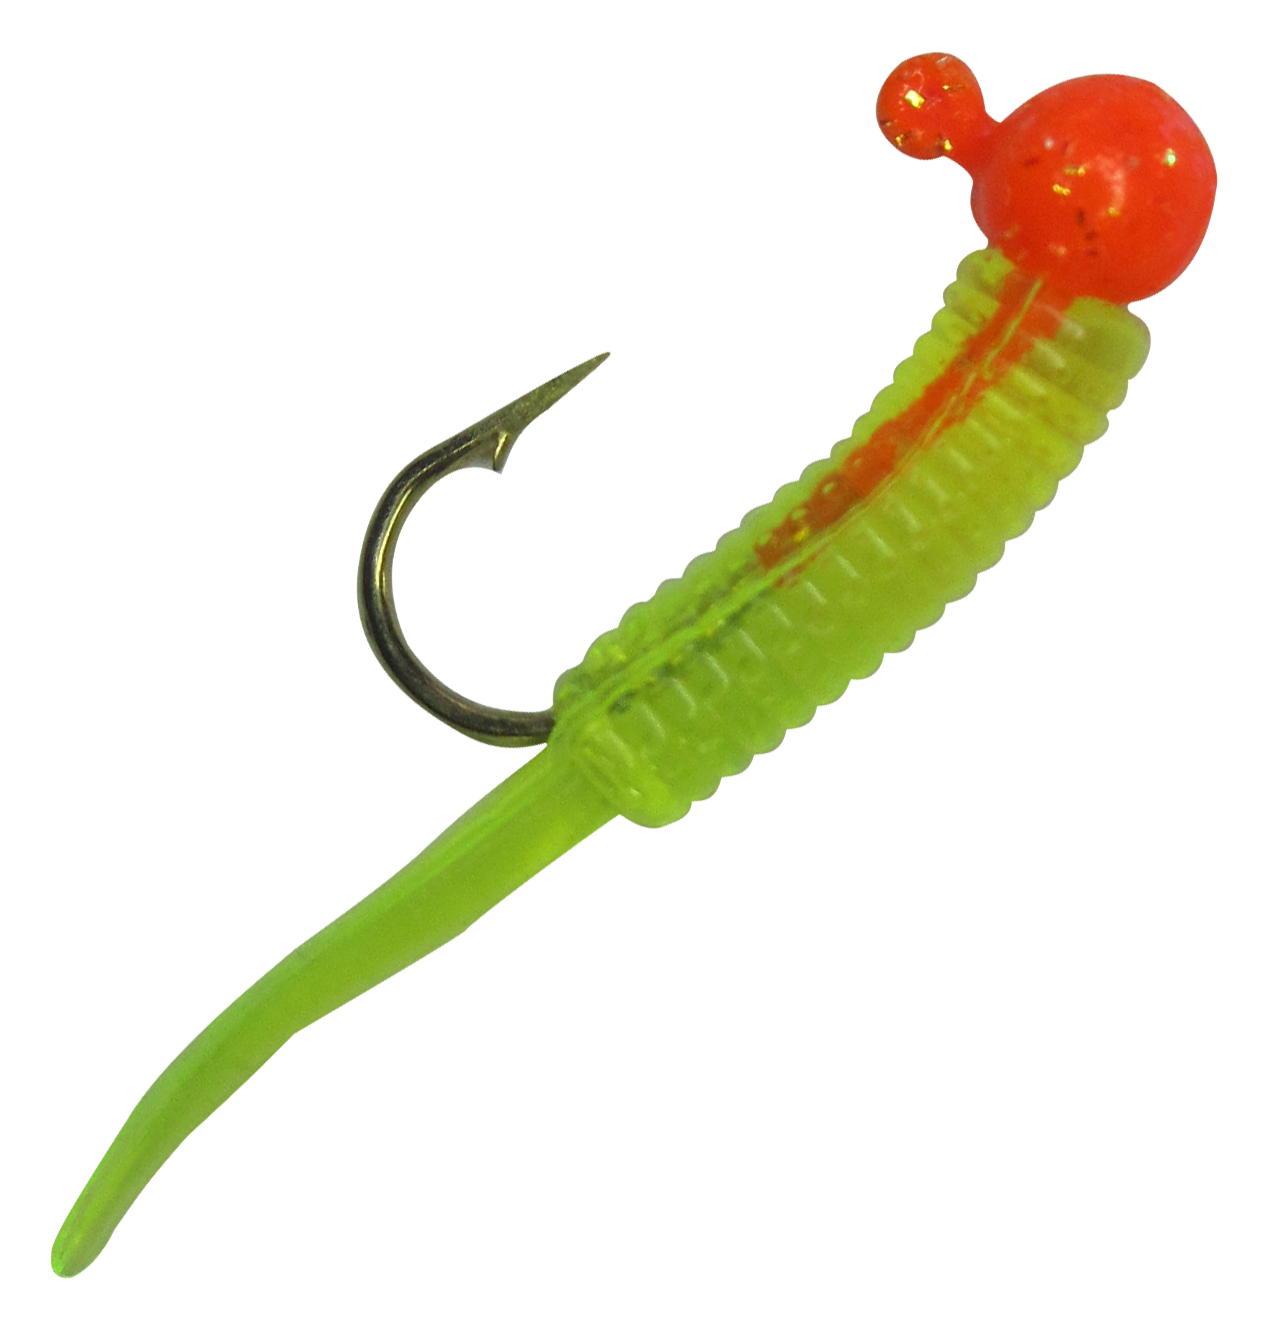 Stopper Lures Whip'r Snaps Jig - Orange/Chartreuse